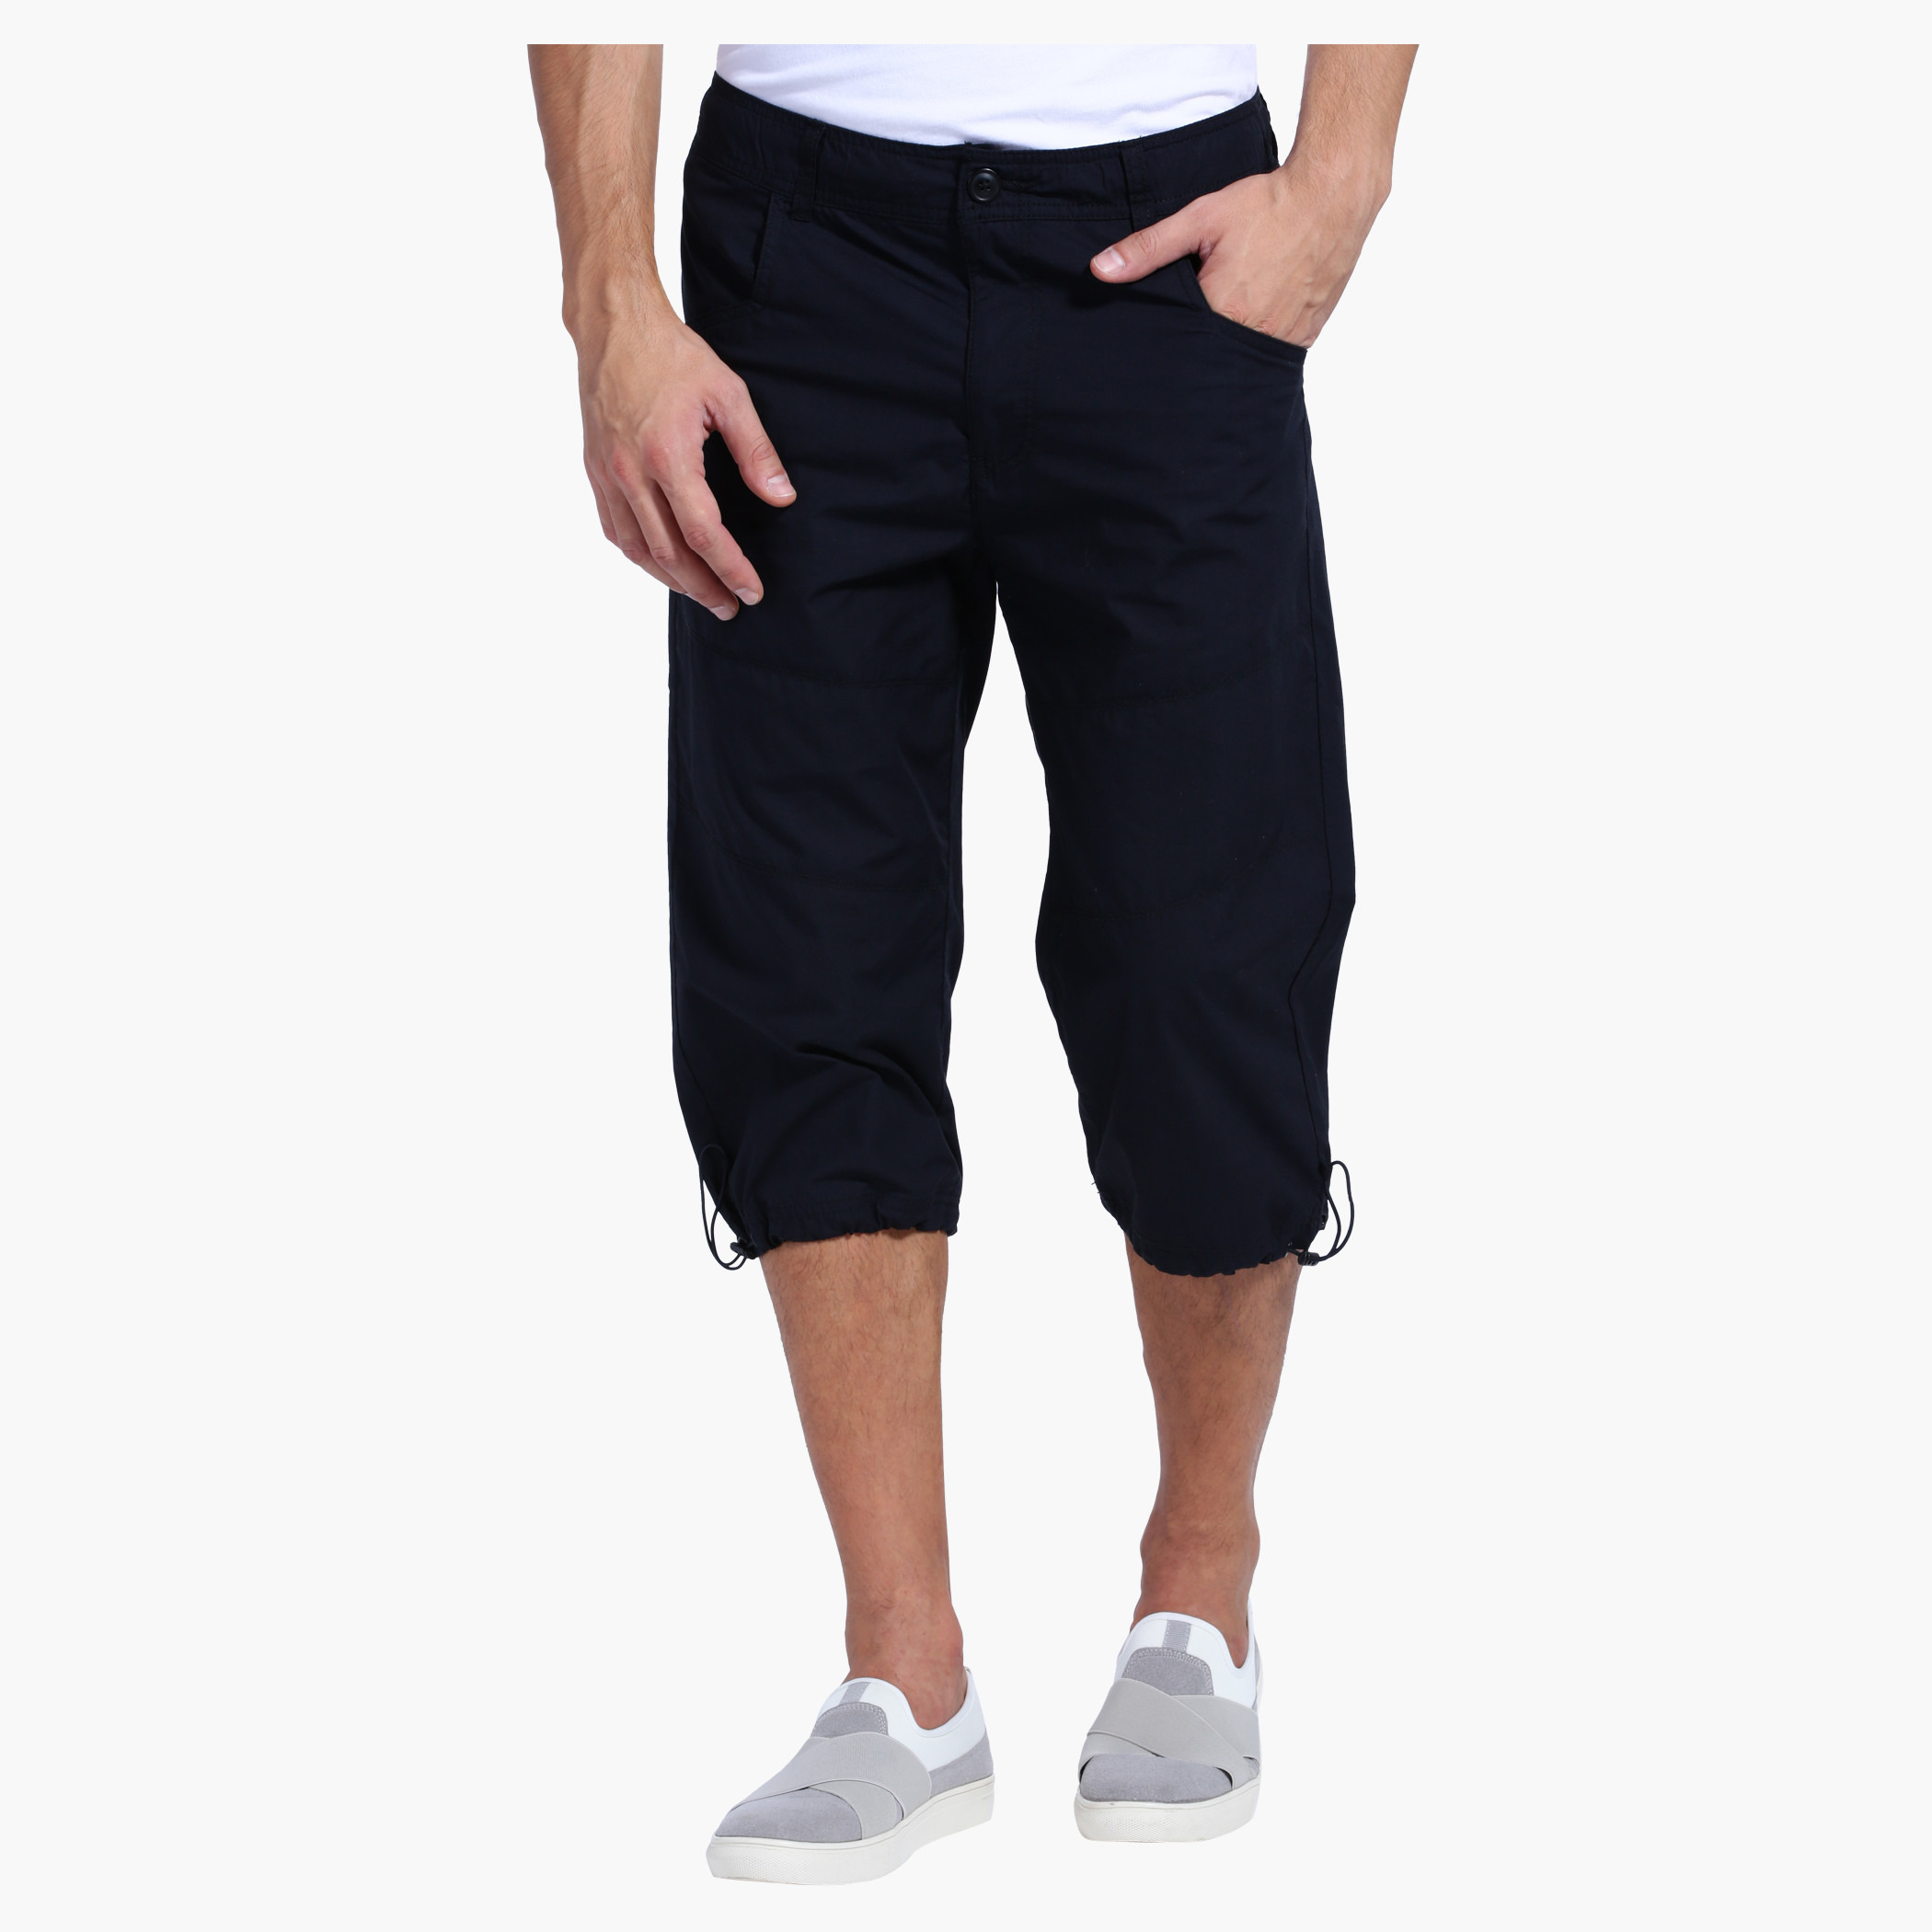 Tracksuit Nike Academy Three quarter pants, nike, adidas, black, tracksuit  png | PNGWing